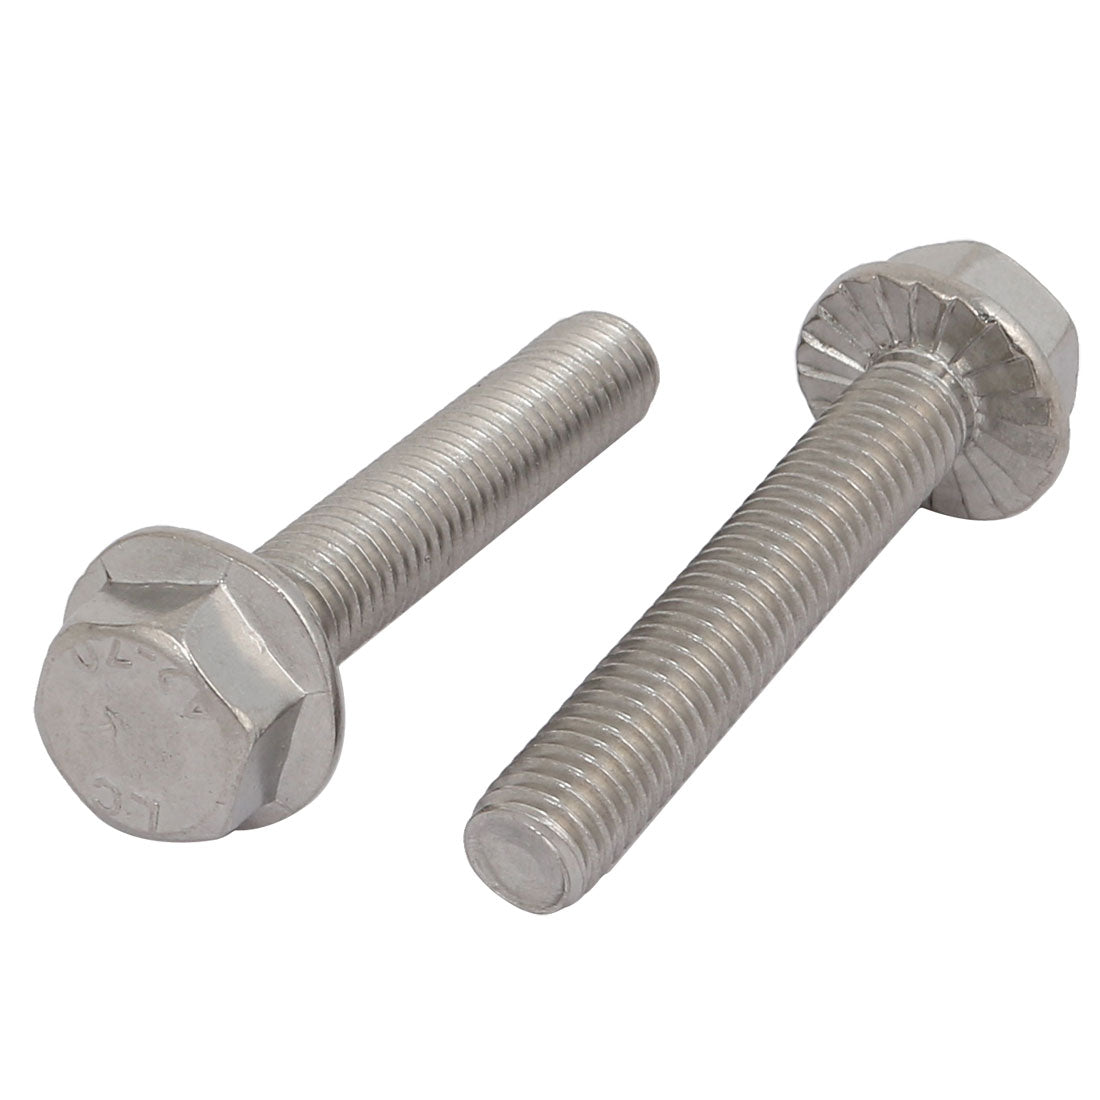 uxcell Uxcell 4Pcs M8 x 45mm Thread 304 Stainless Steel Hex Serrated Head Flange Screw Bolt